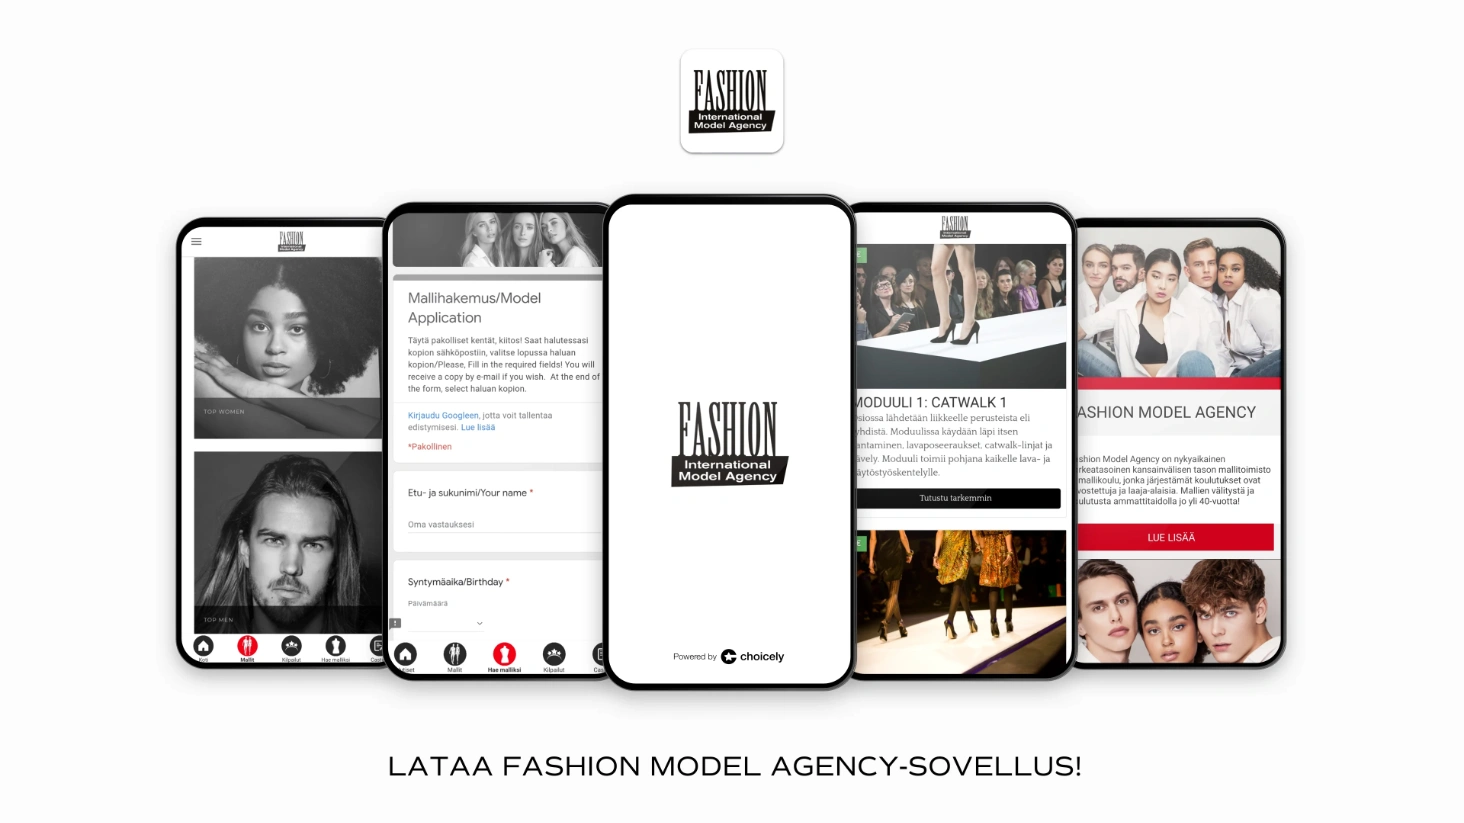 Different Fashion Model Agency app screen shown on phones